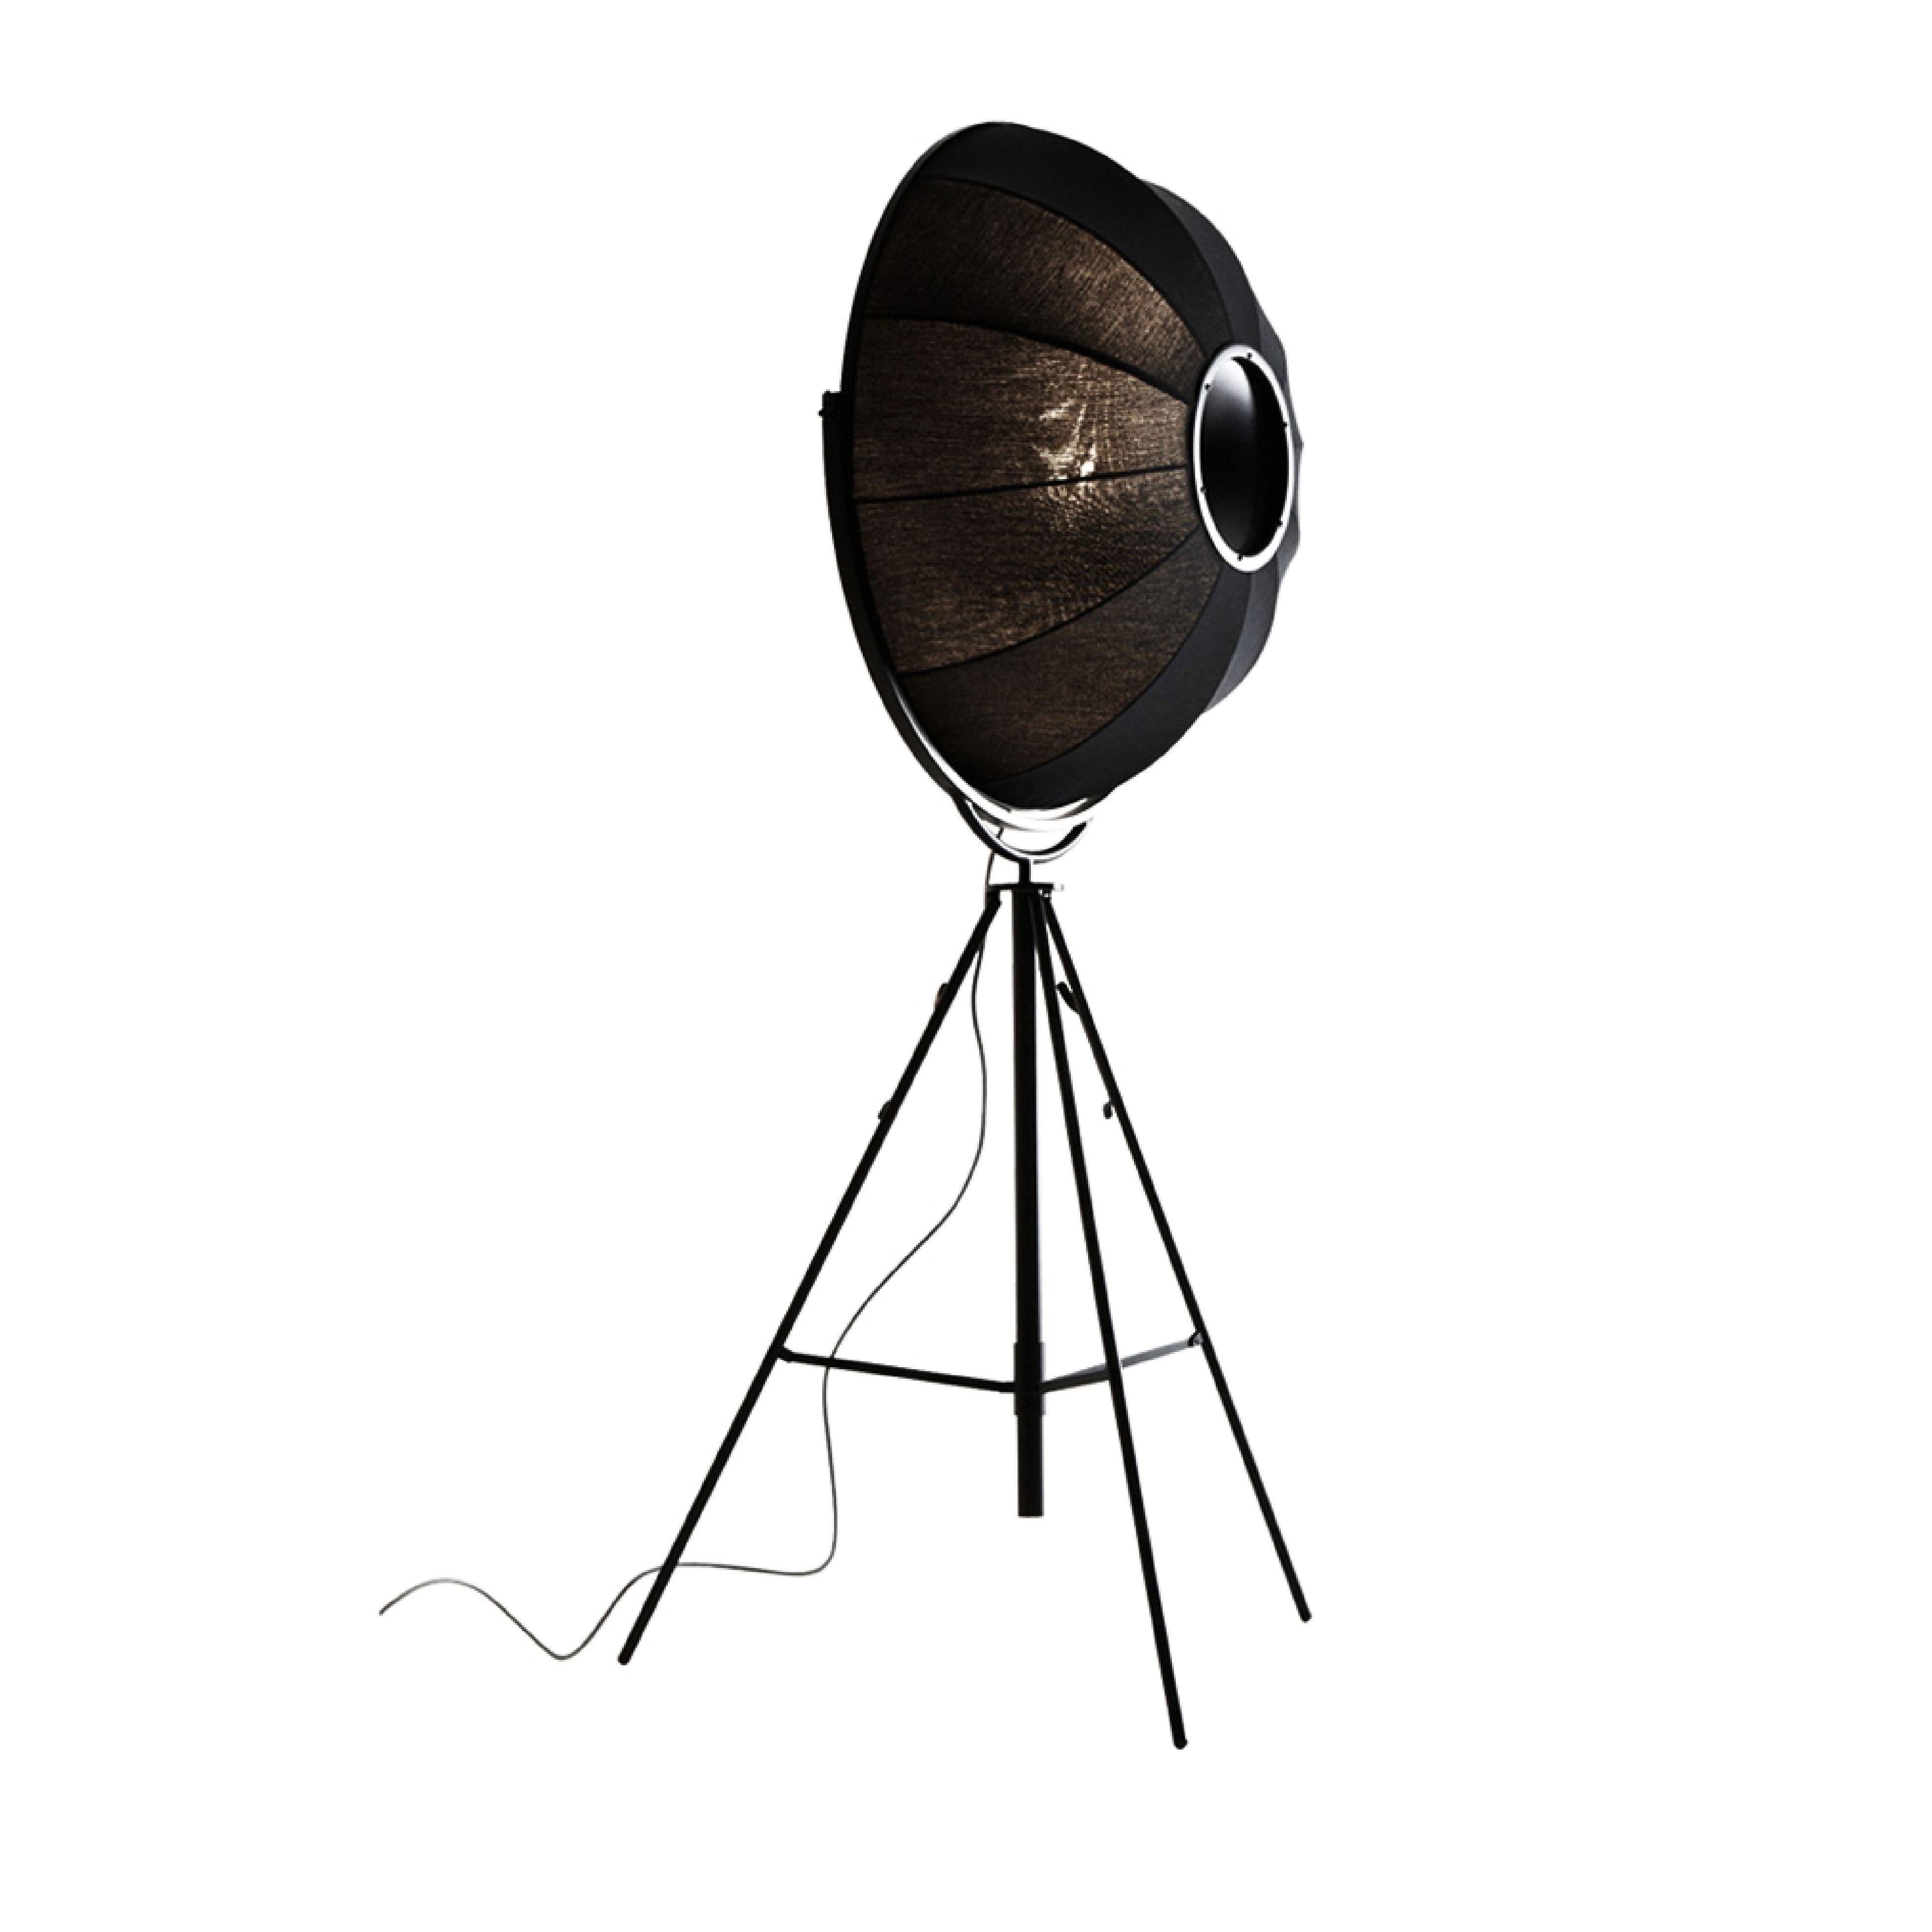 Mariano Fortuny y Madrazo 1907 Classic Black, Nera, modern floor lamp, Pallucco. Conceived by Mariano Fortuny in 1907, Fortuny was inspired by experiments he carried out in that year on a new indirect lighting system for stage lighting. His patented